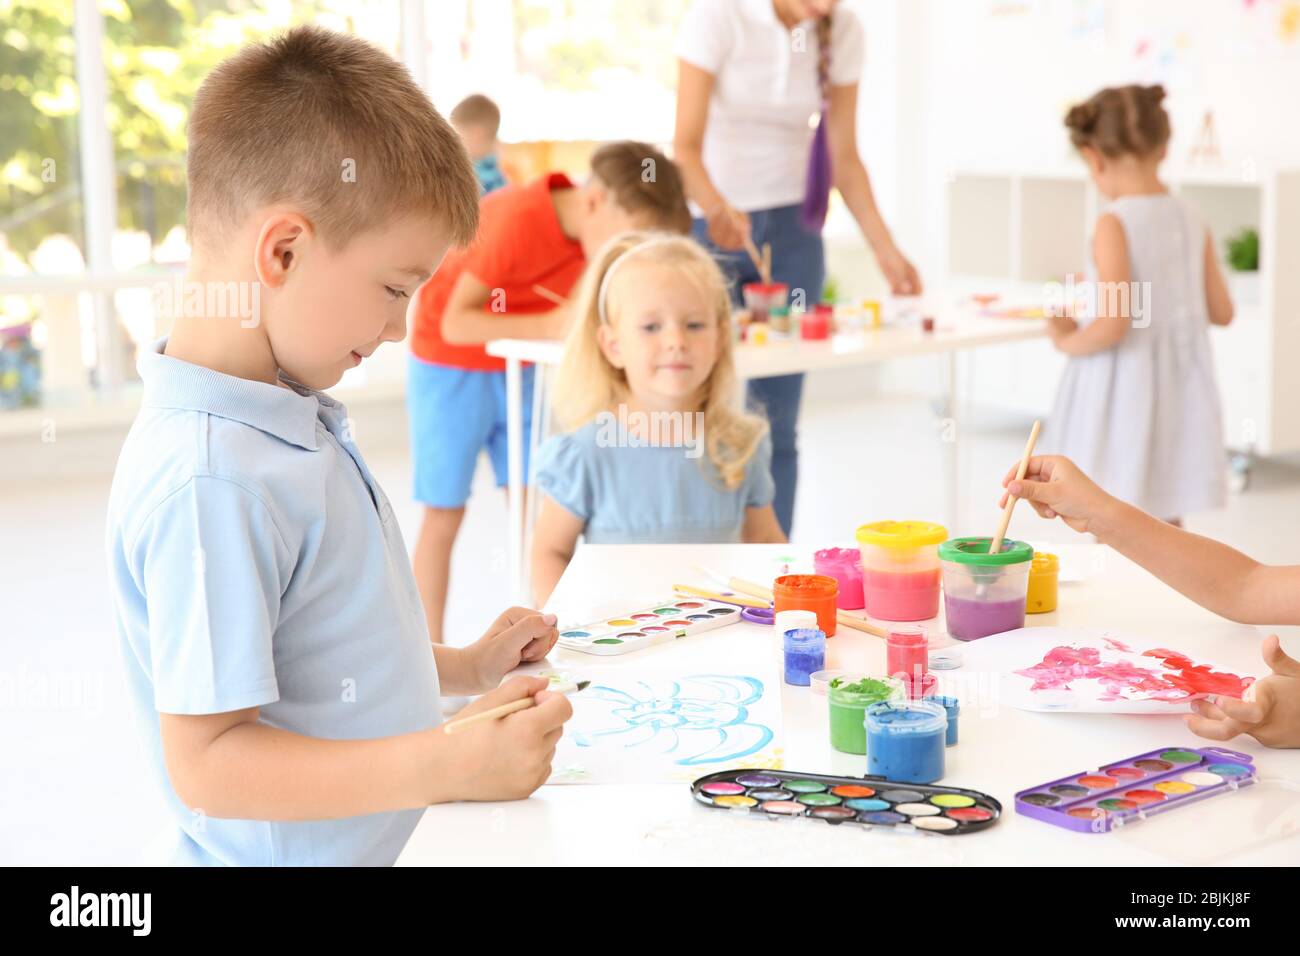 Little boy at painting lesson in classroom Stock Photo